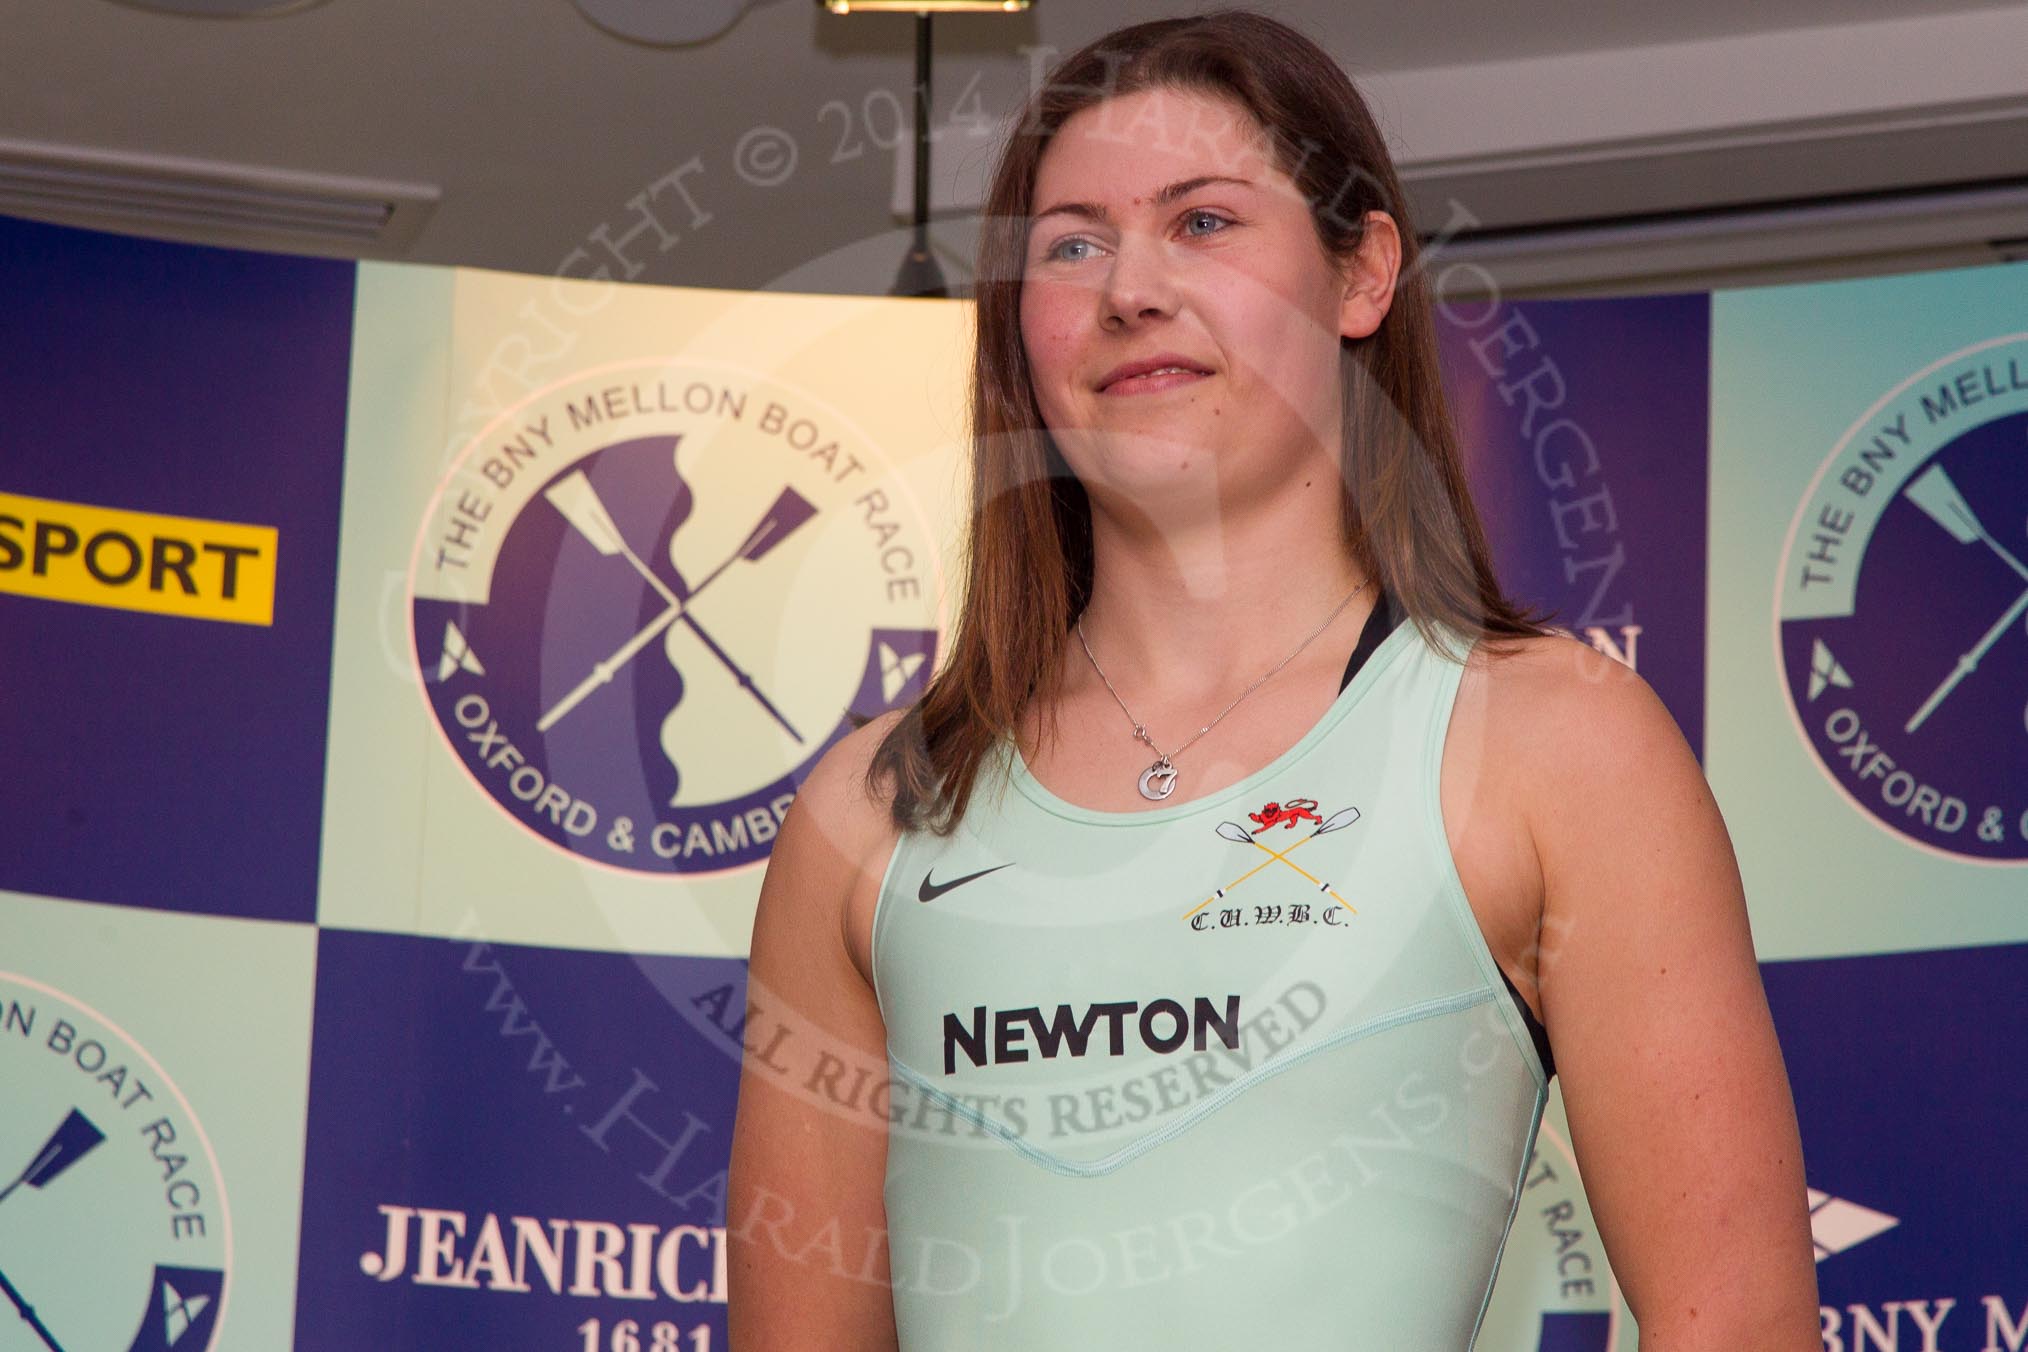 The Boat Race season 2014 - Crew Announcement and Weigh In: The 2014 Women's Boat Race crews: Cambridge stroke Emily Day - 64kg..
BNY Mellon Centre,
London EC4V 4LA,
London,
United Kingdom,
on 10 March 2014 at 11:50, image #52